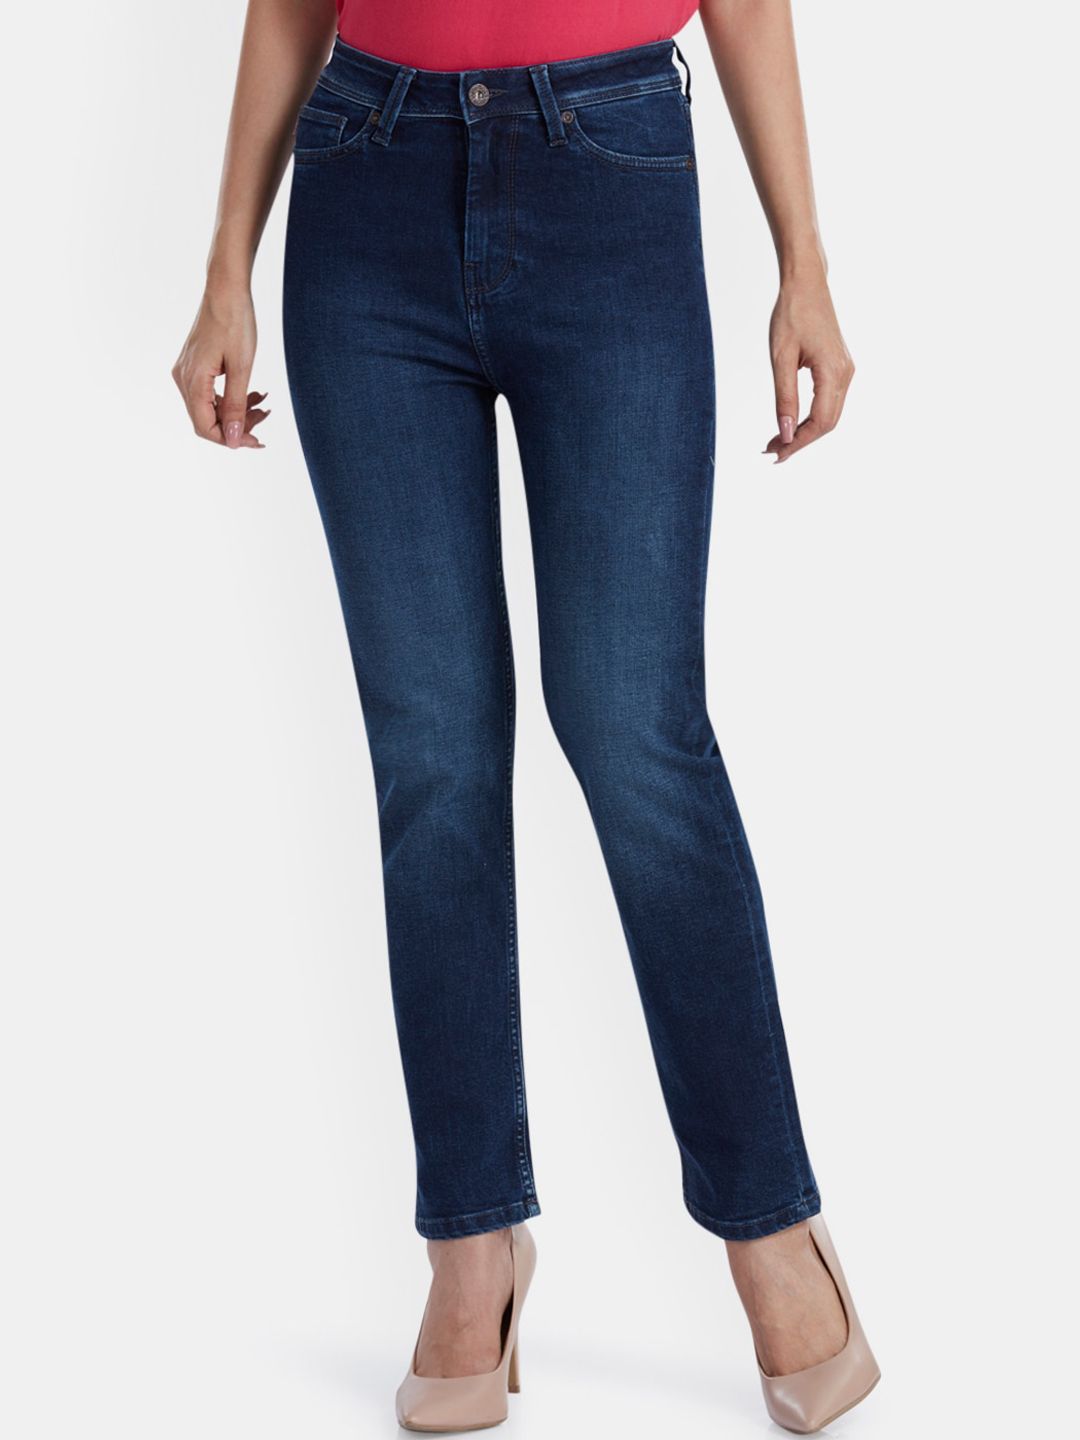 Pepe Jeans Women Blue Slim Fit High-Rise Clean Look Jeans Price in India